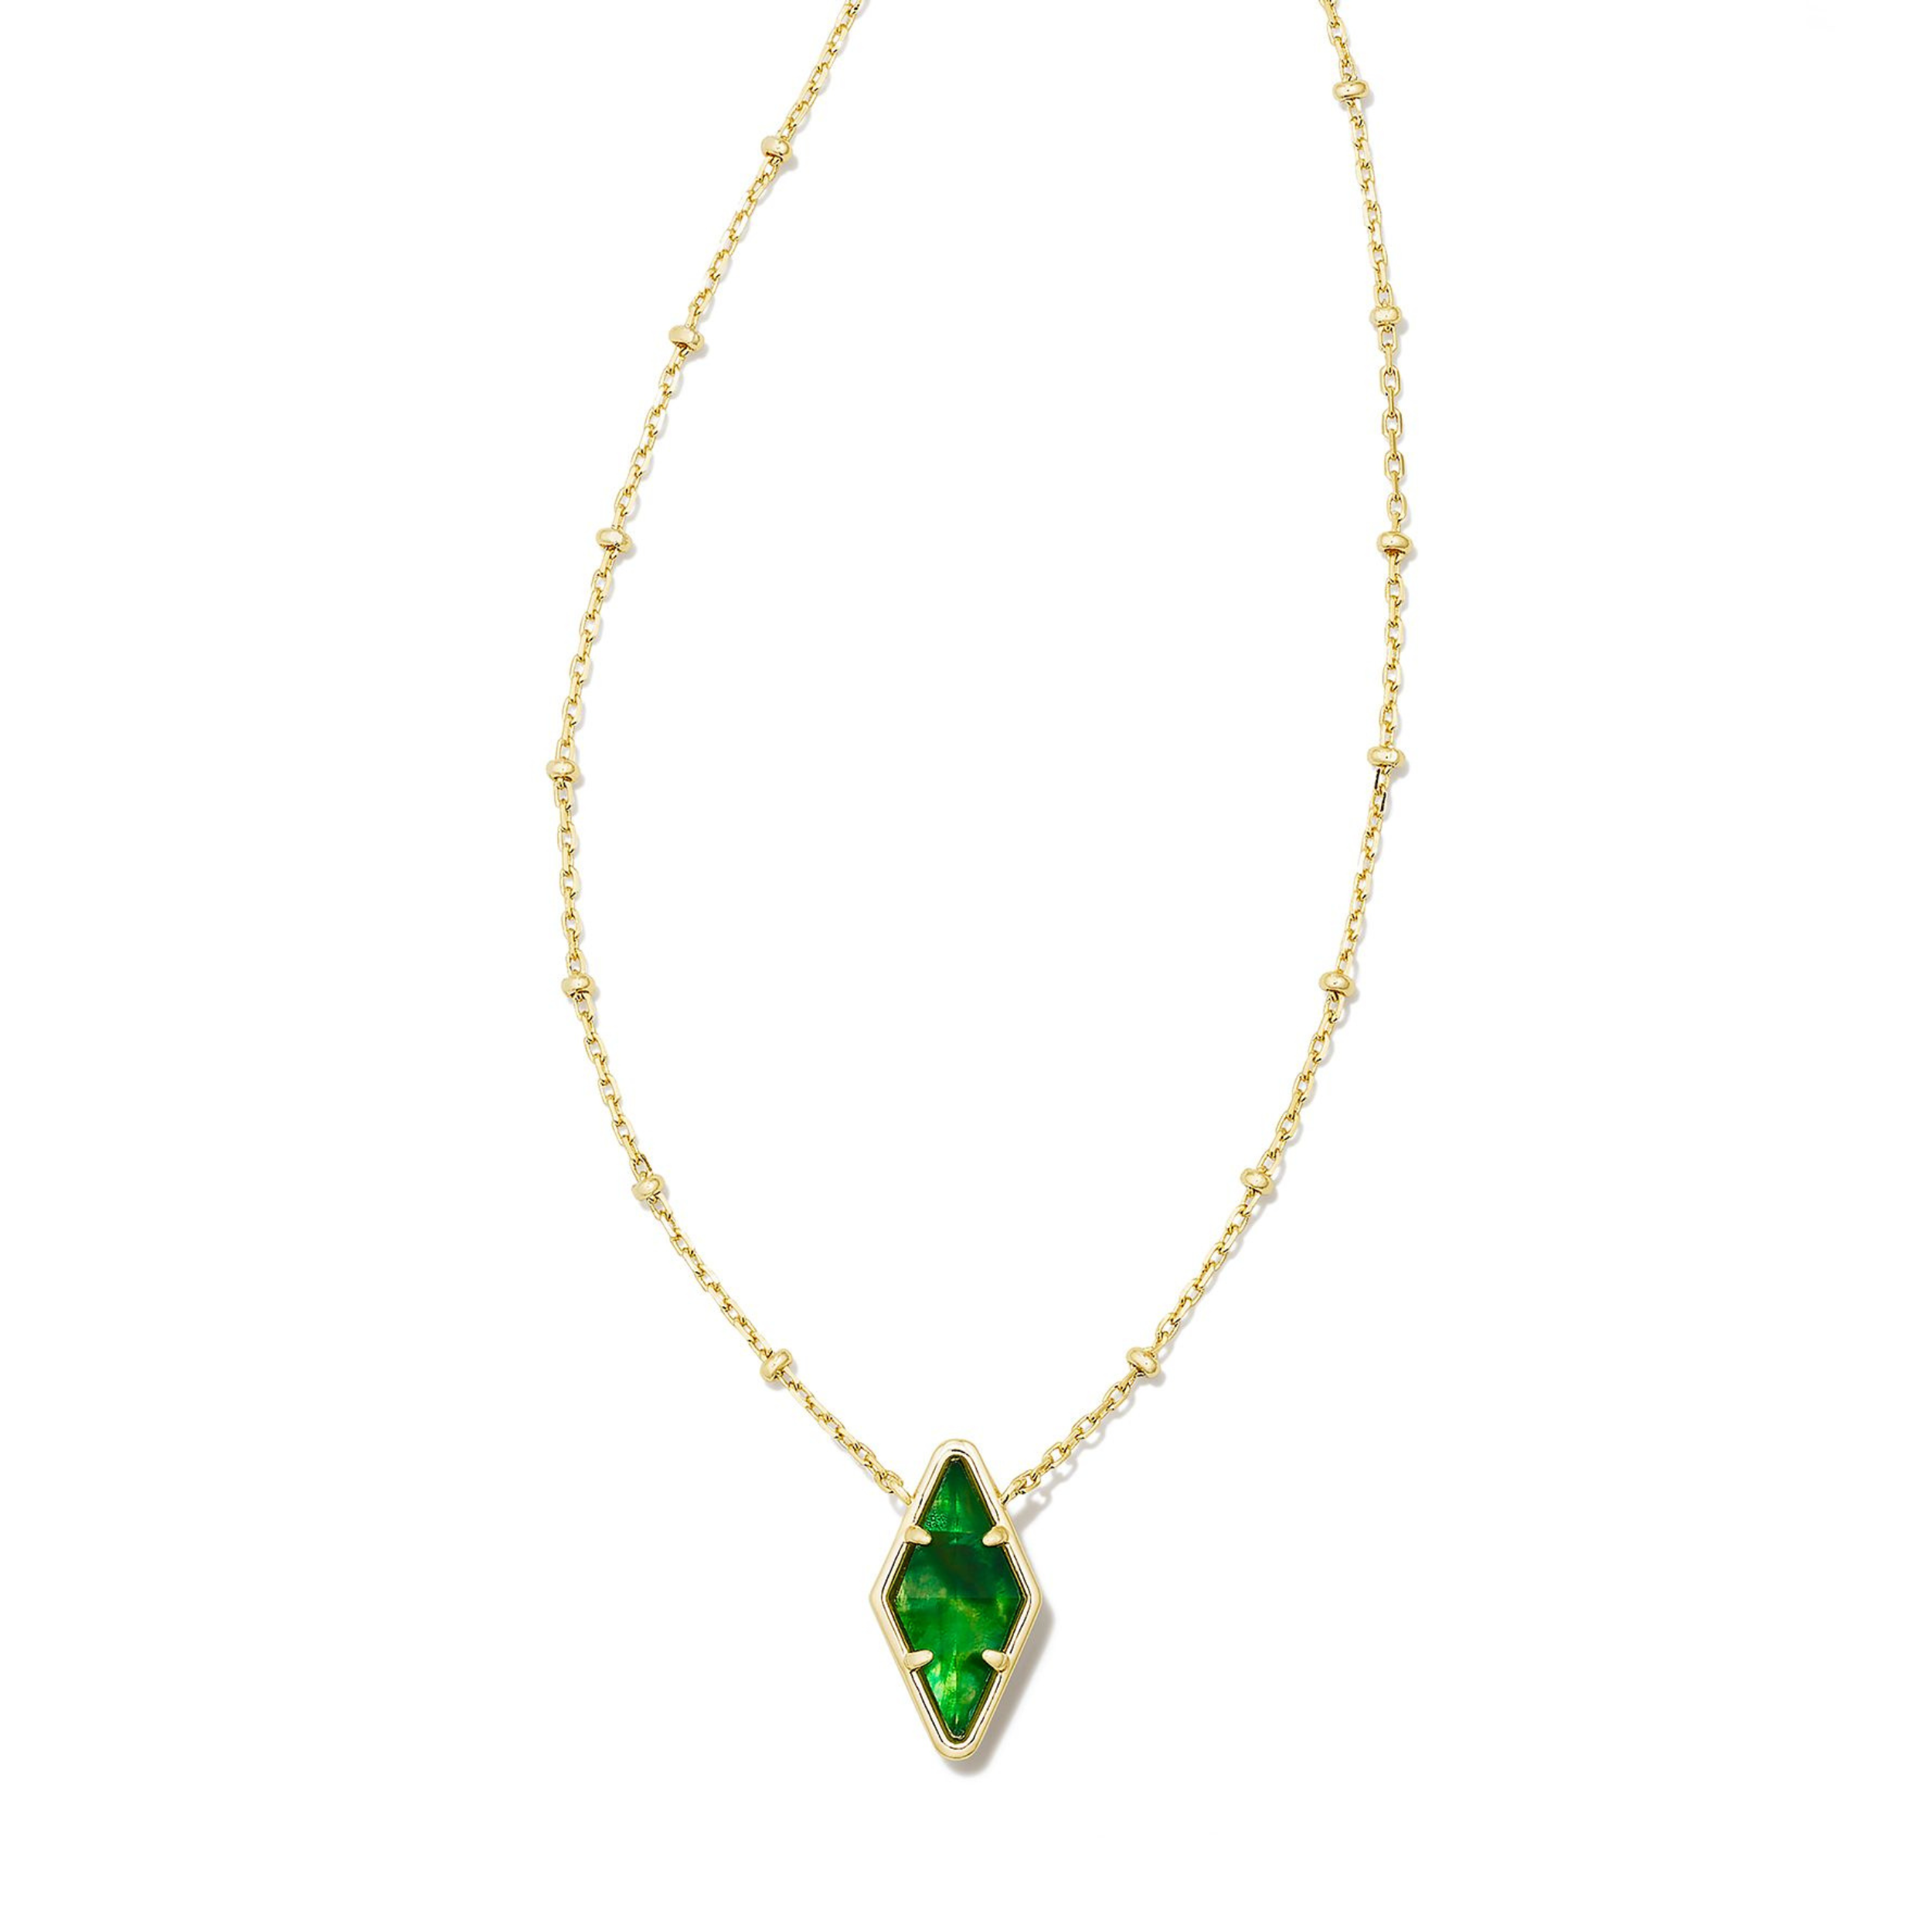 Gold necklace with diamond shaped pendant in kelly green illusion pictured on a white background.